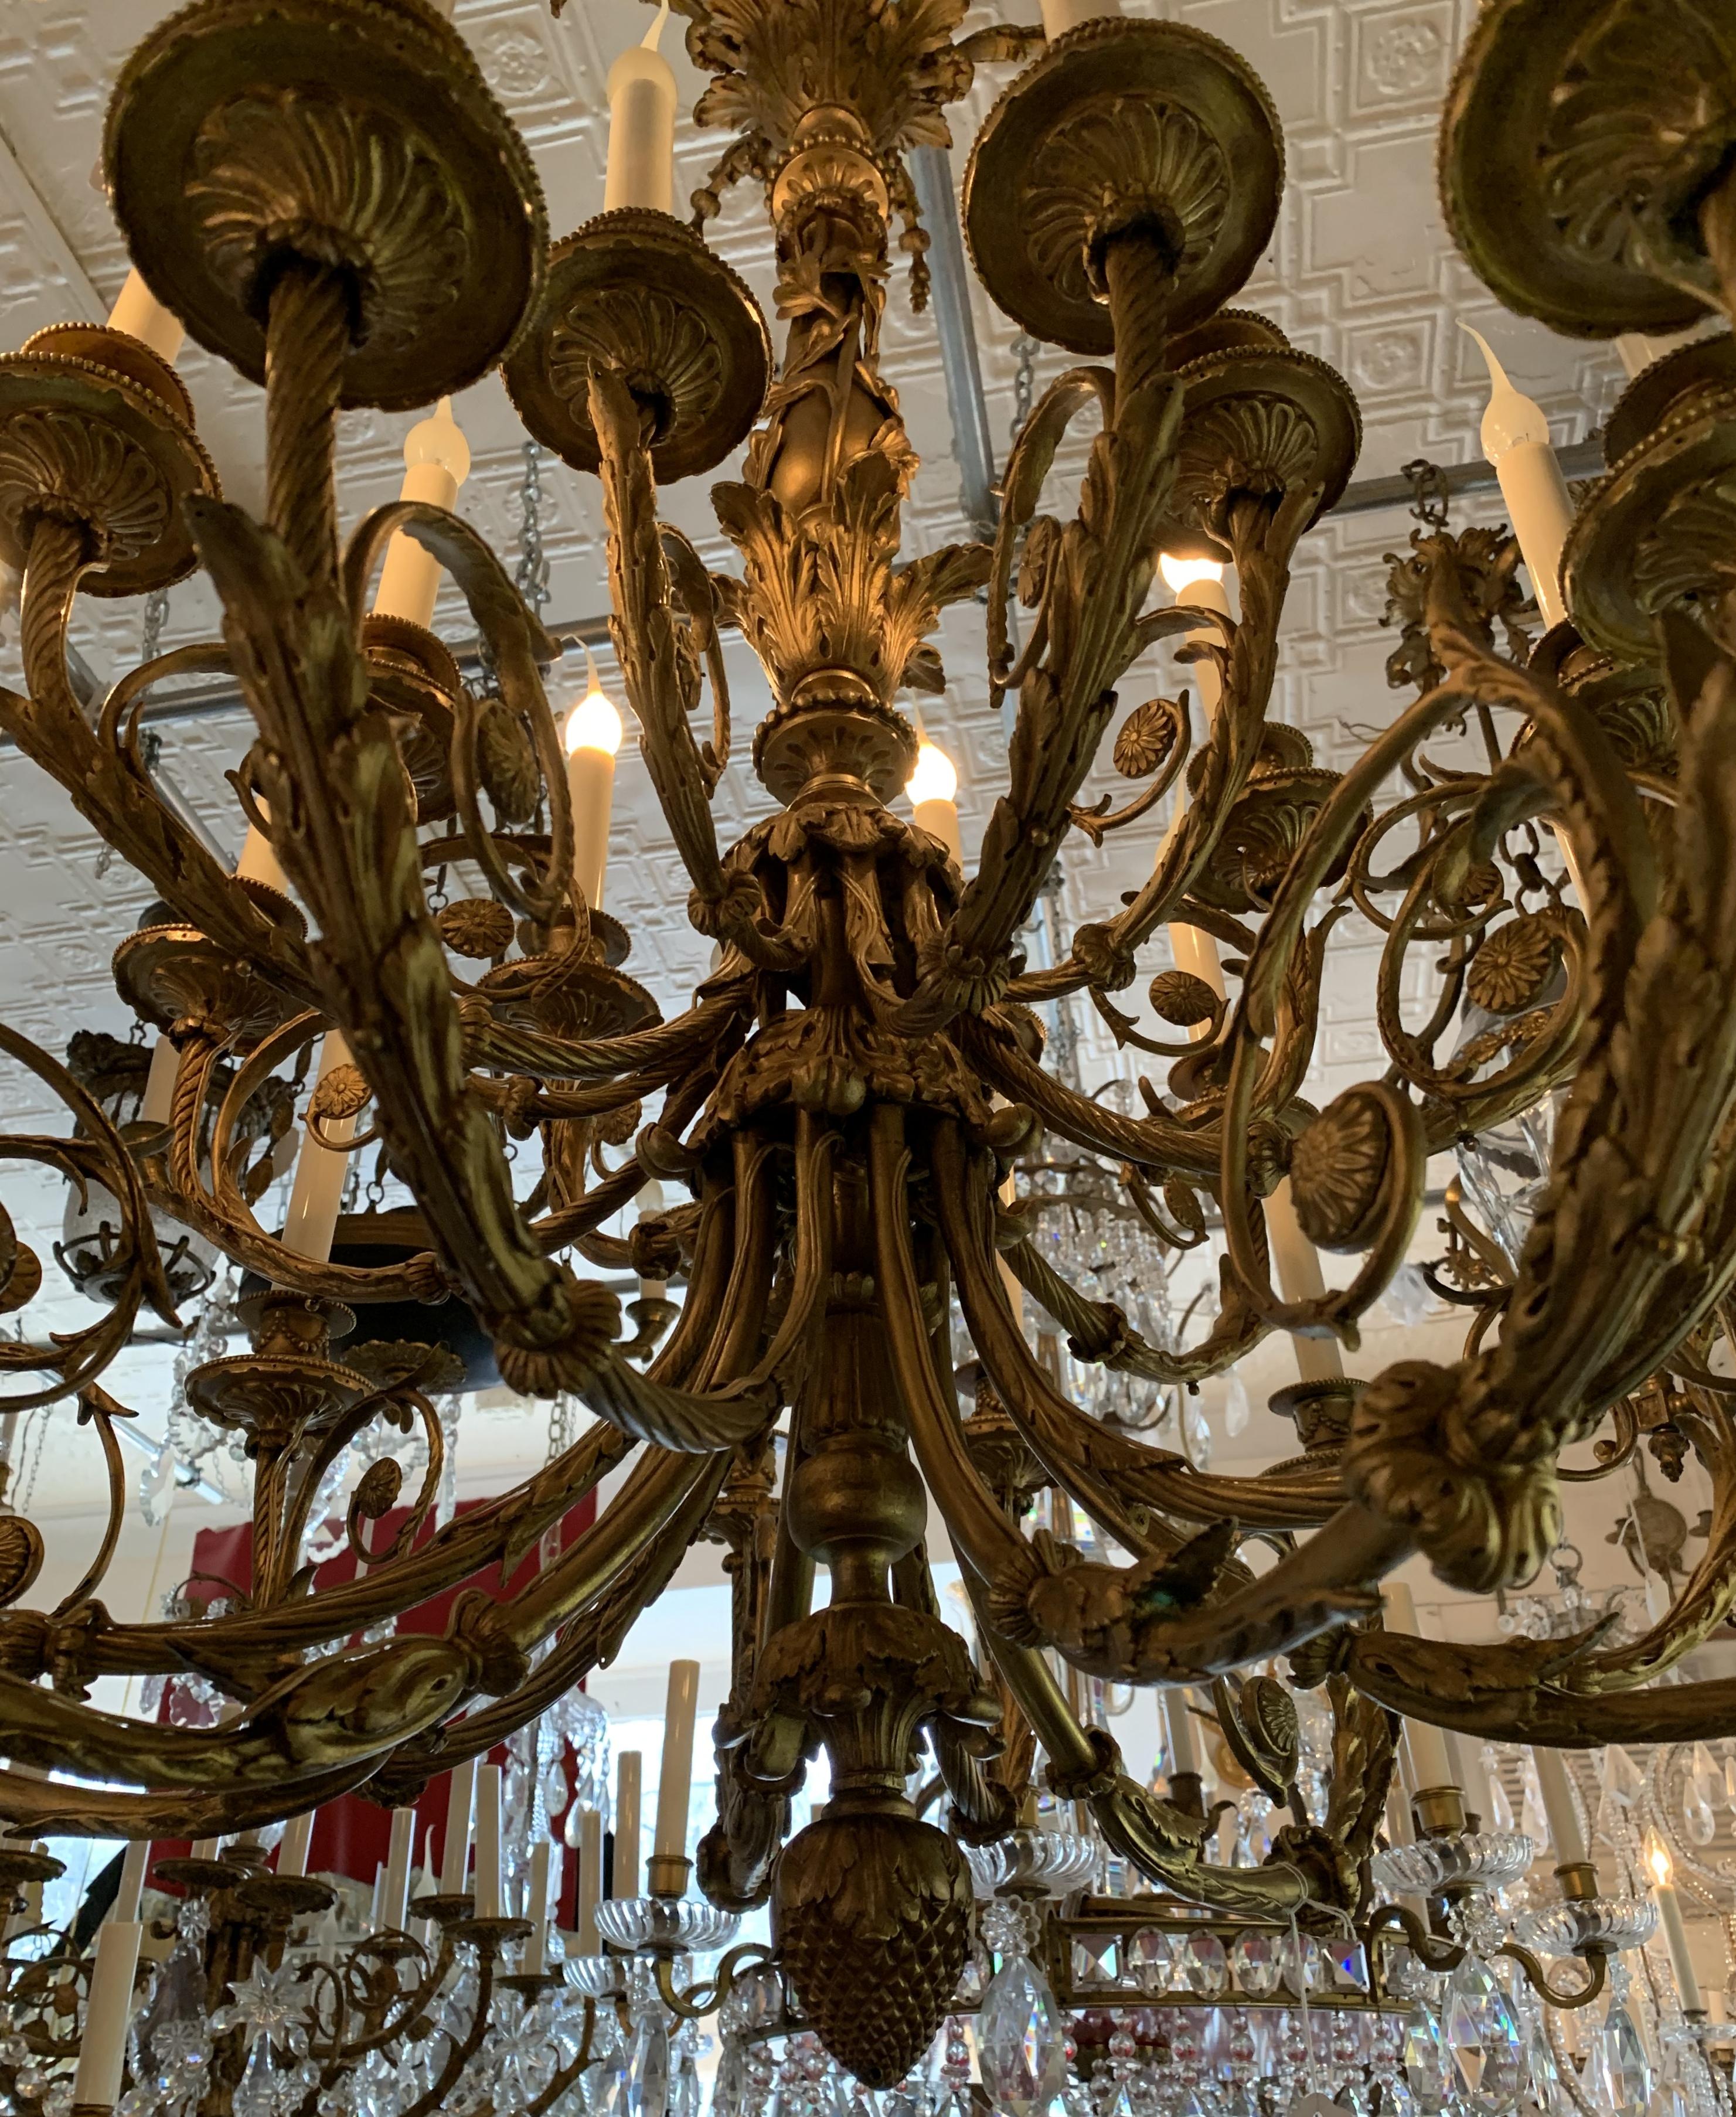 A wonderful monumental 19th century French Regency bronze 24-light two-tier chandelier
Completely rewired and ready to enjoy with chain, canopy and mounting hardware.

Actual chandelier without chain 44